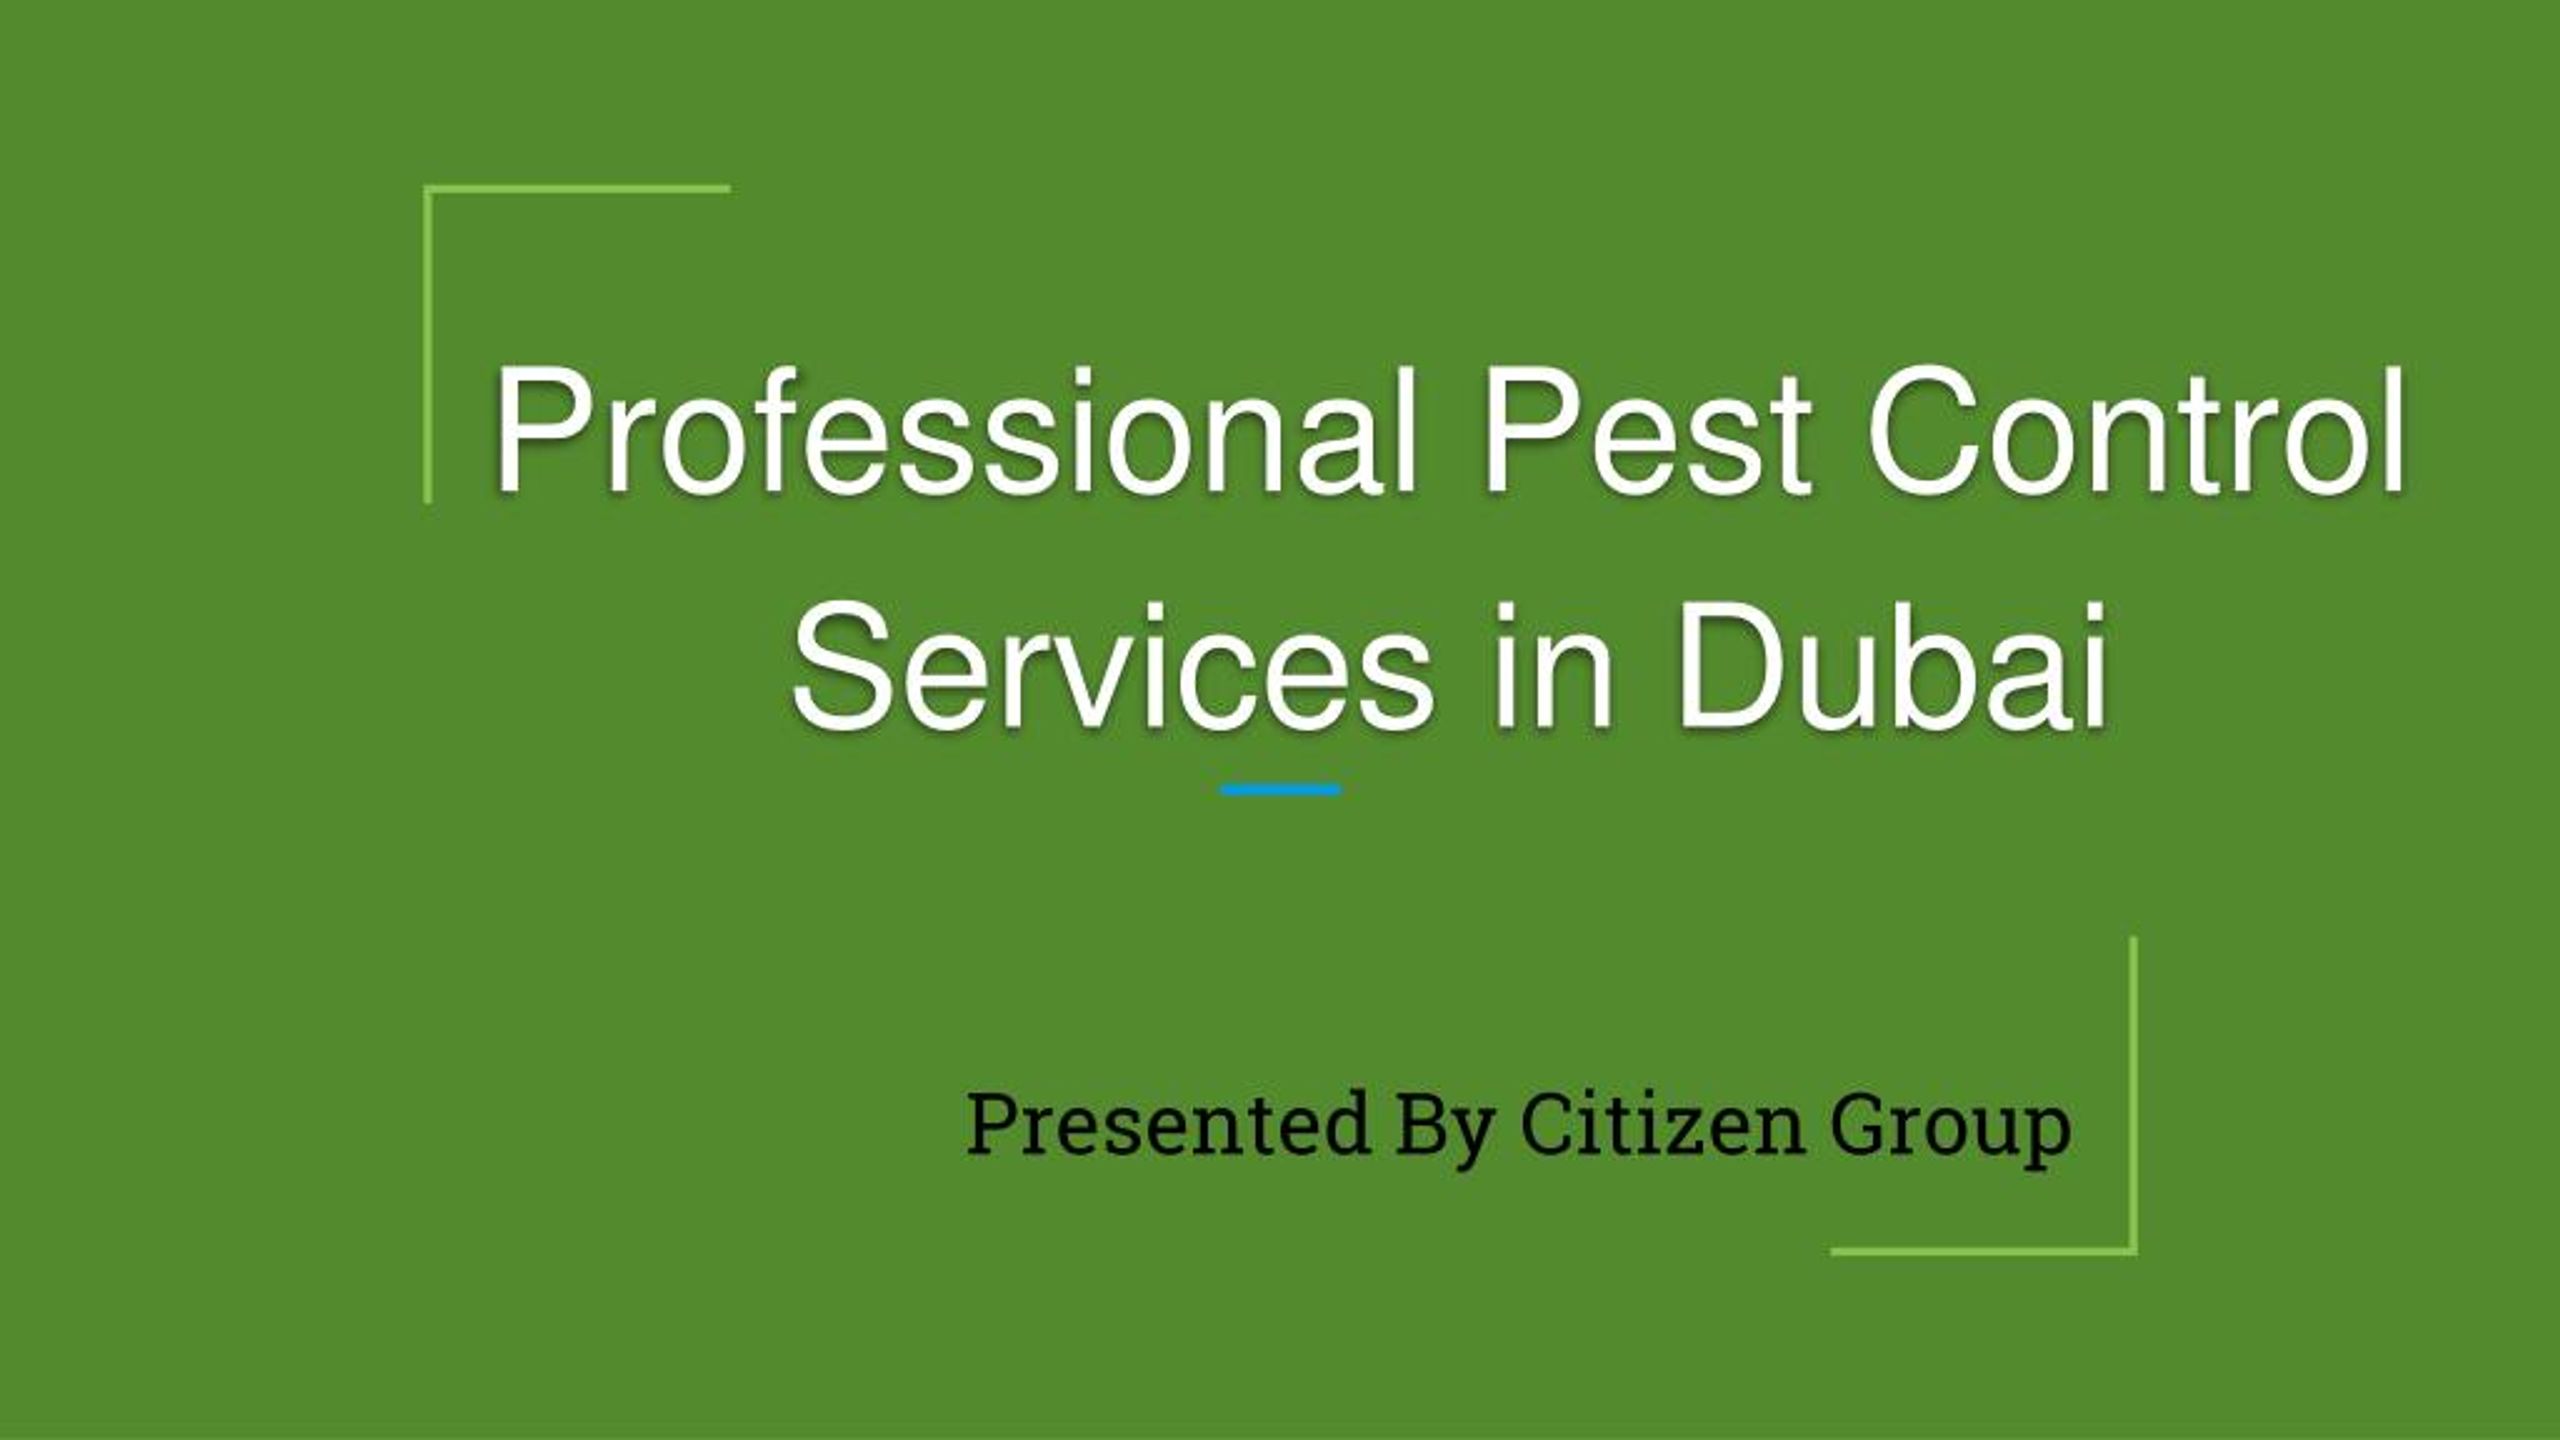 I Care Godrej Pest Control, Mc Layout - Pest Control Services in Bangalore  - Justdial